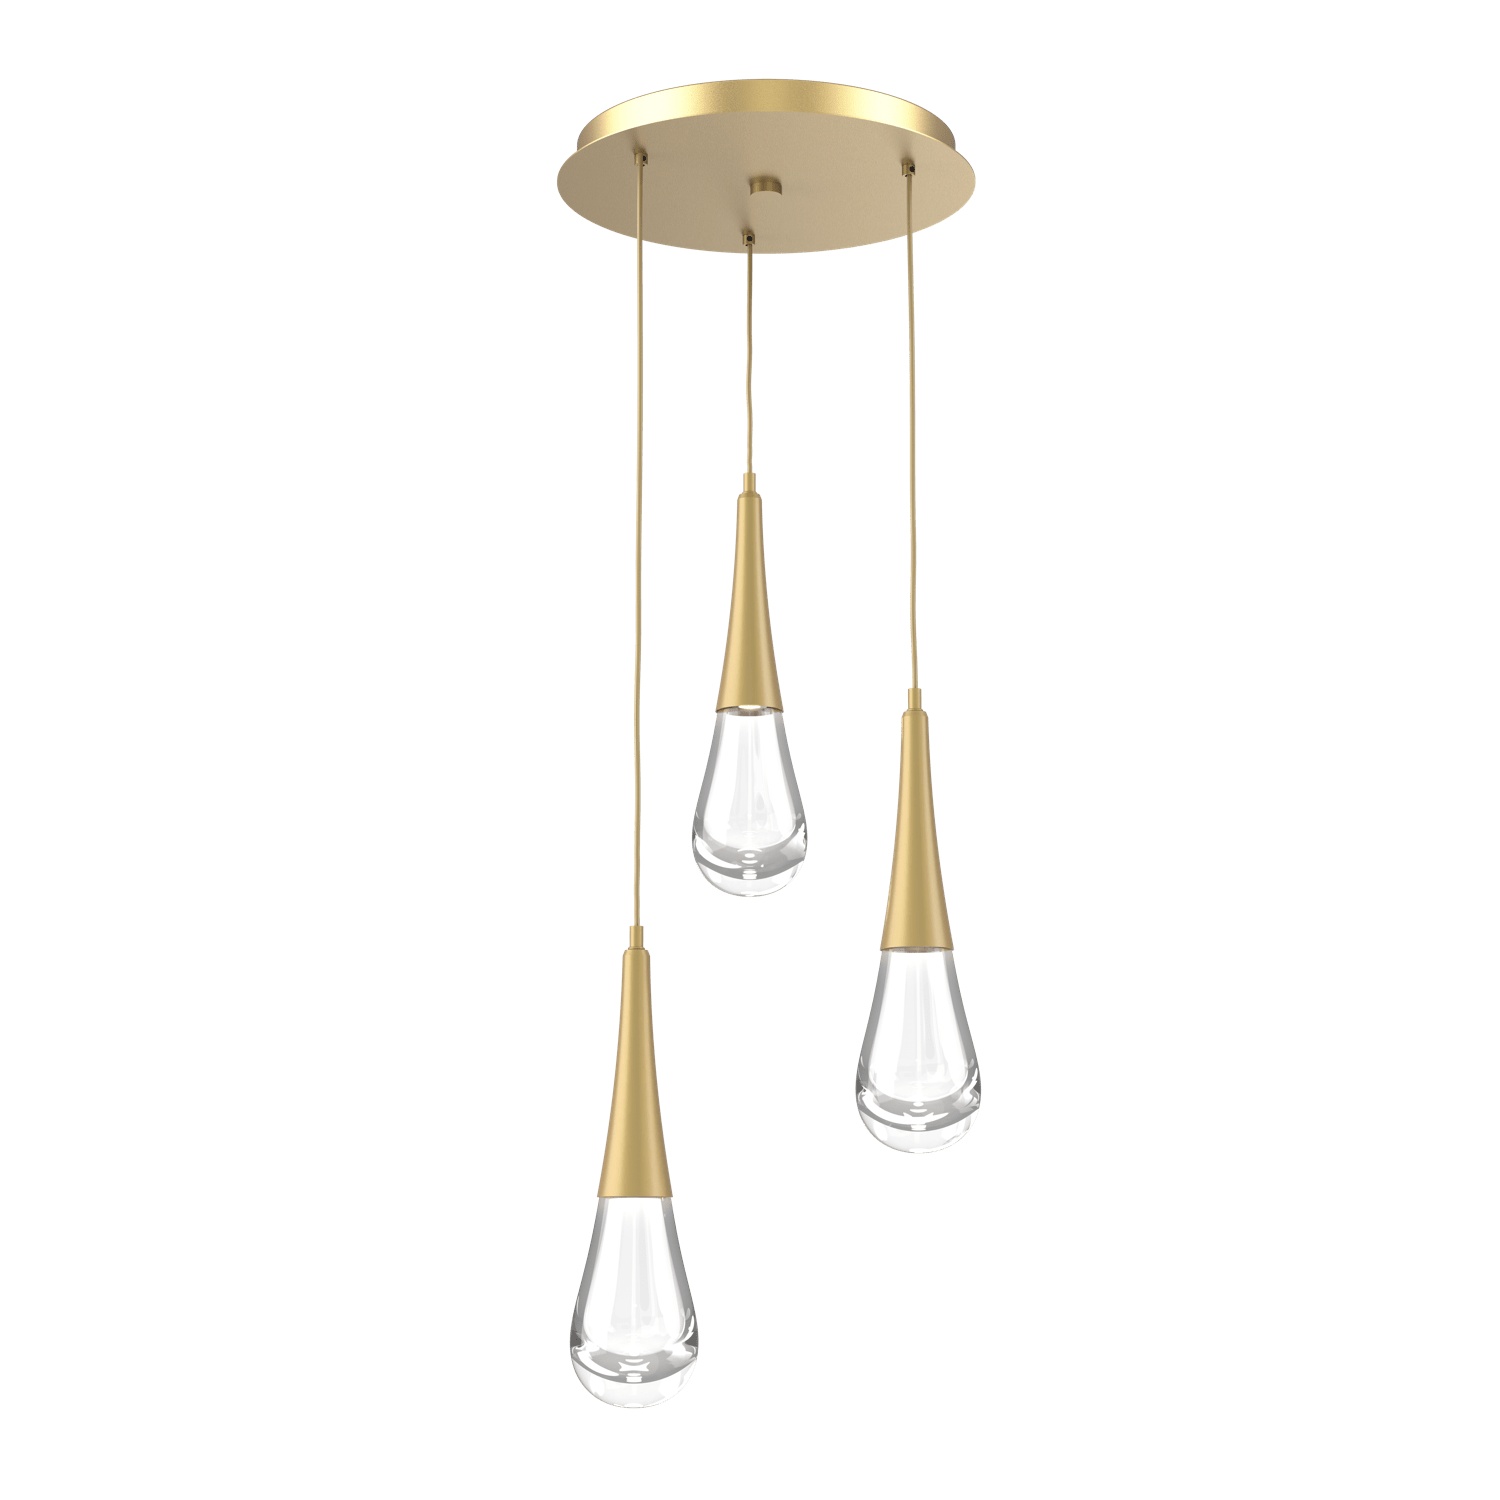 CHB0078-03-GB-Hammerton-Studio-Raindrop-3-light-round-pendant-chandelier-with-gilded-brass-finish-and-clear-blown-glass-shades-and-LED-lamping